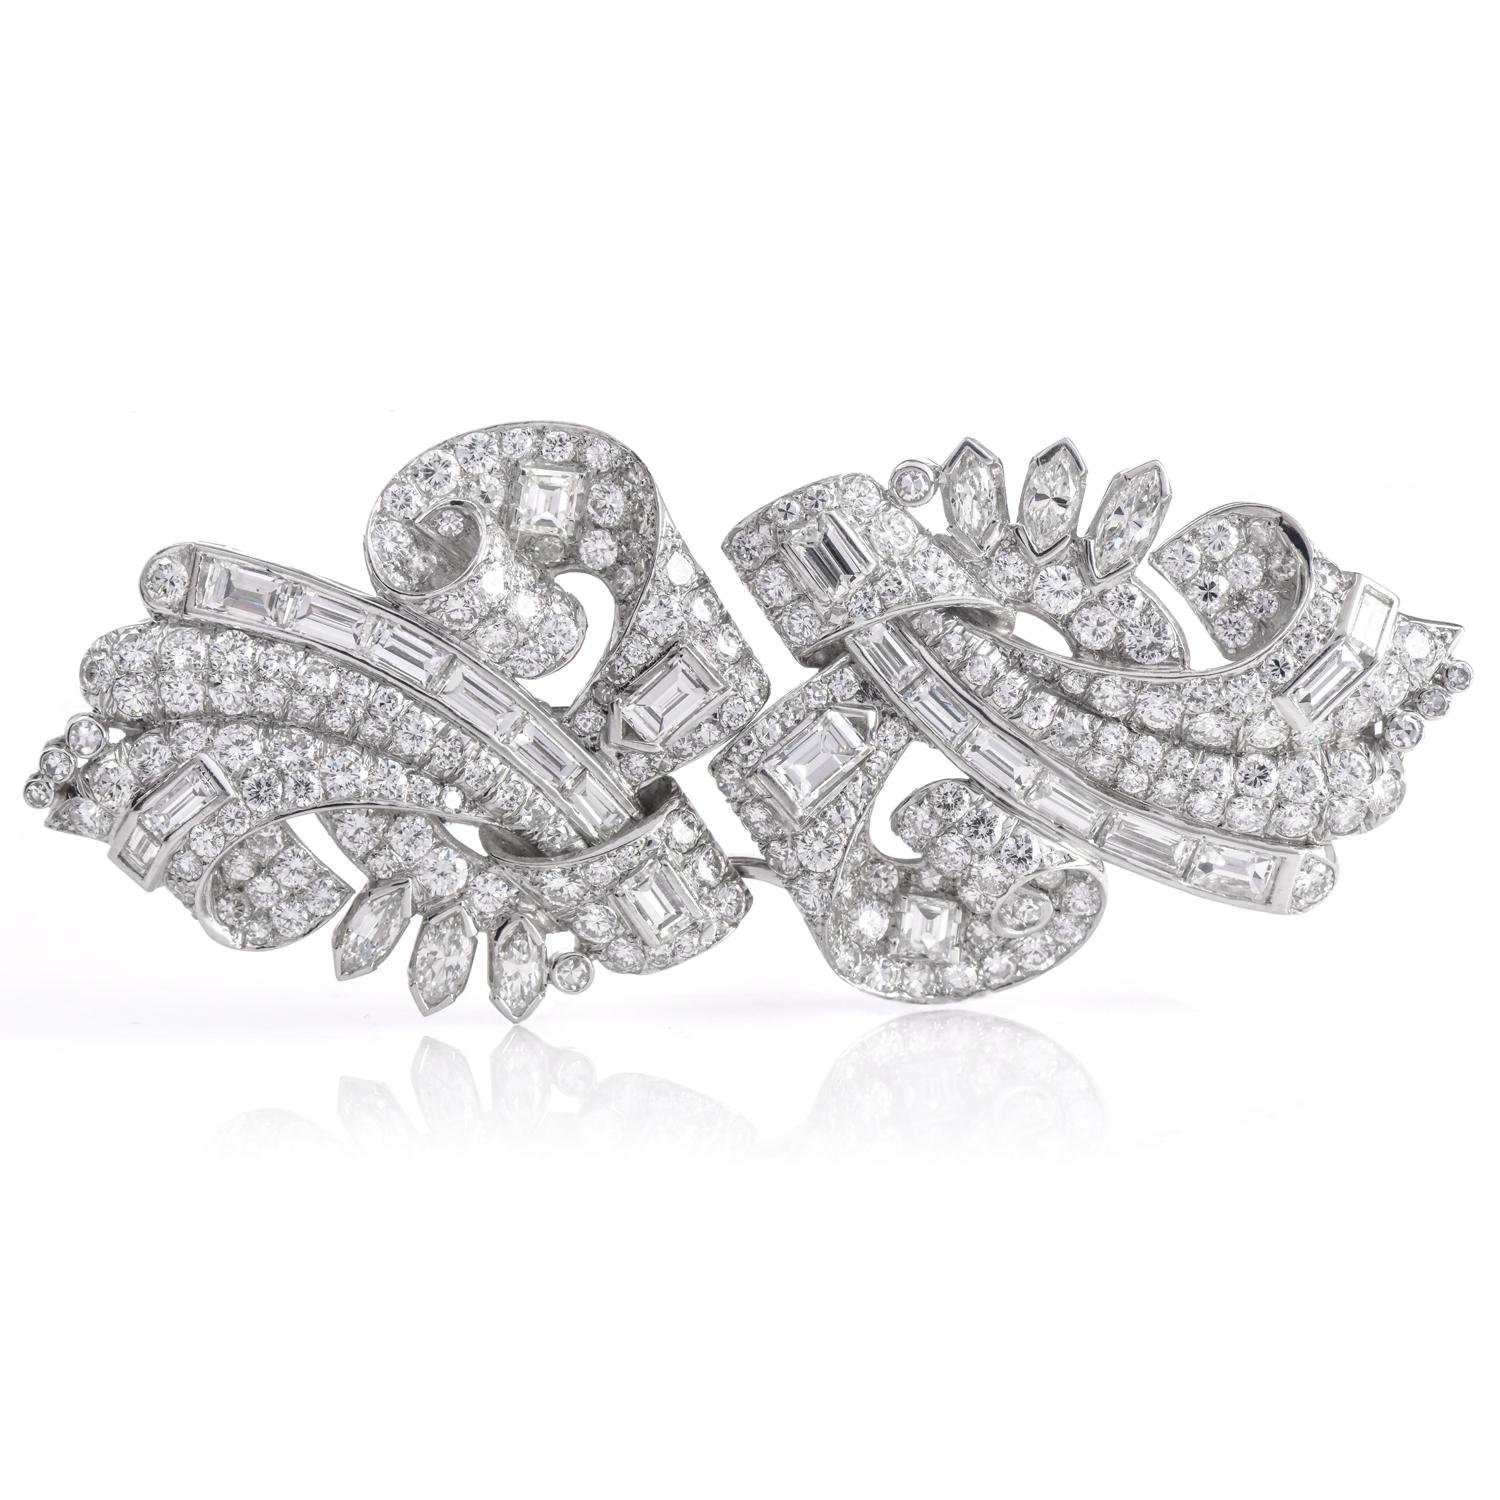 Presenting an exquisite vintage jewelry piece: a double clip brooch pin showcasing an impressive 12.82 carat total weight of natural diamonds, all set in elegant platinum. This brooch is a testament to exceptional craftsmanship, featuring a